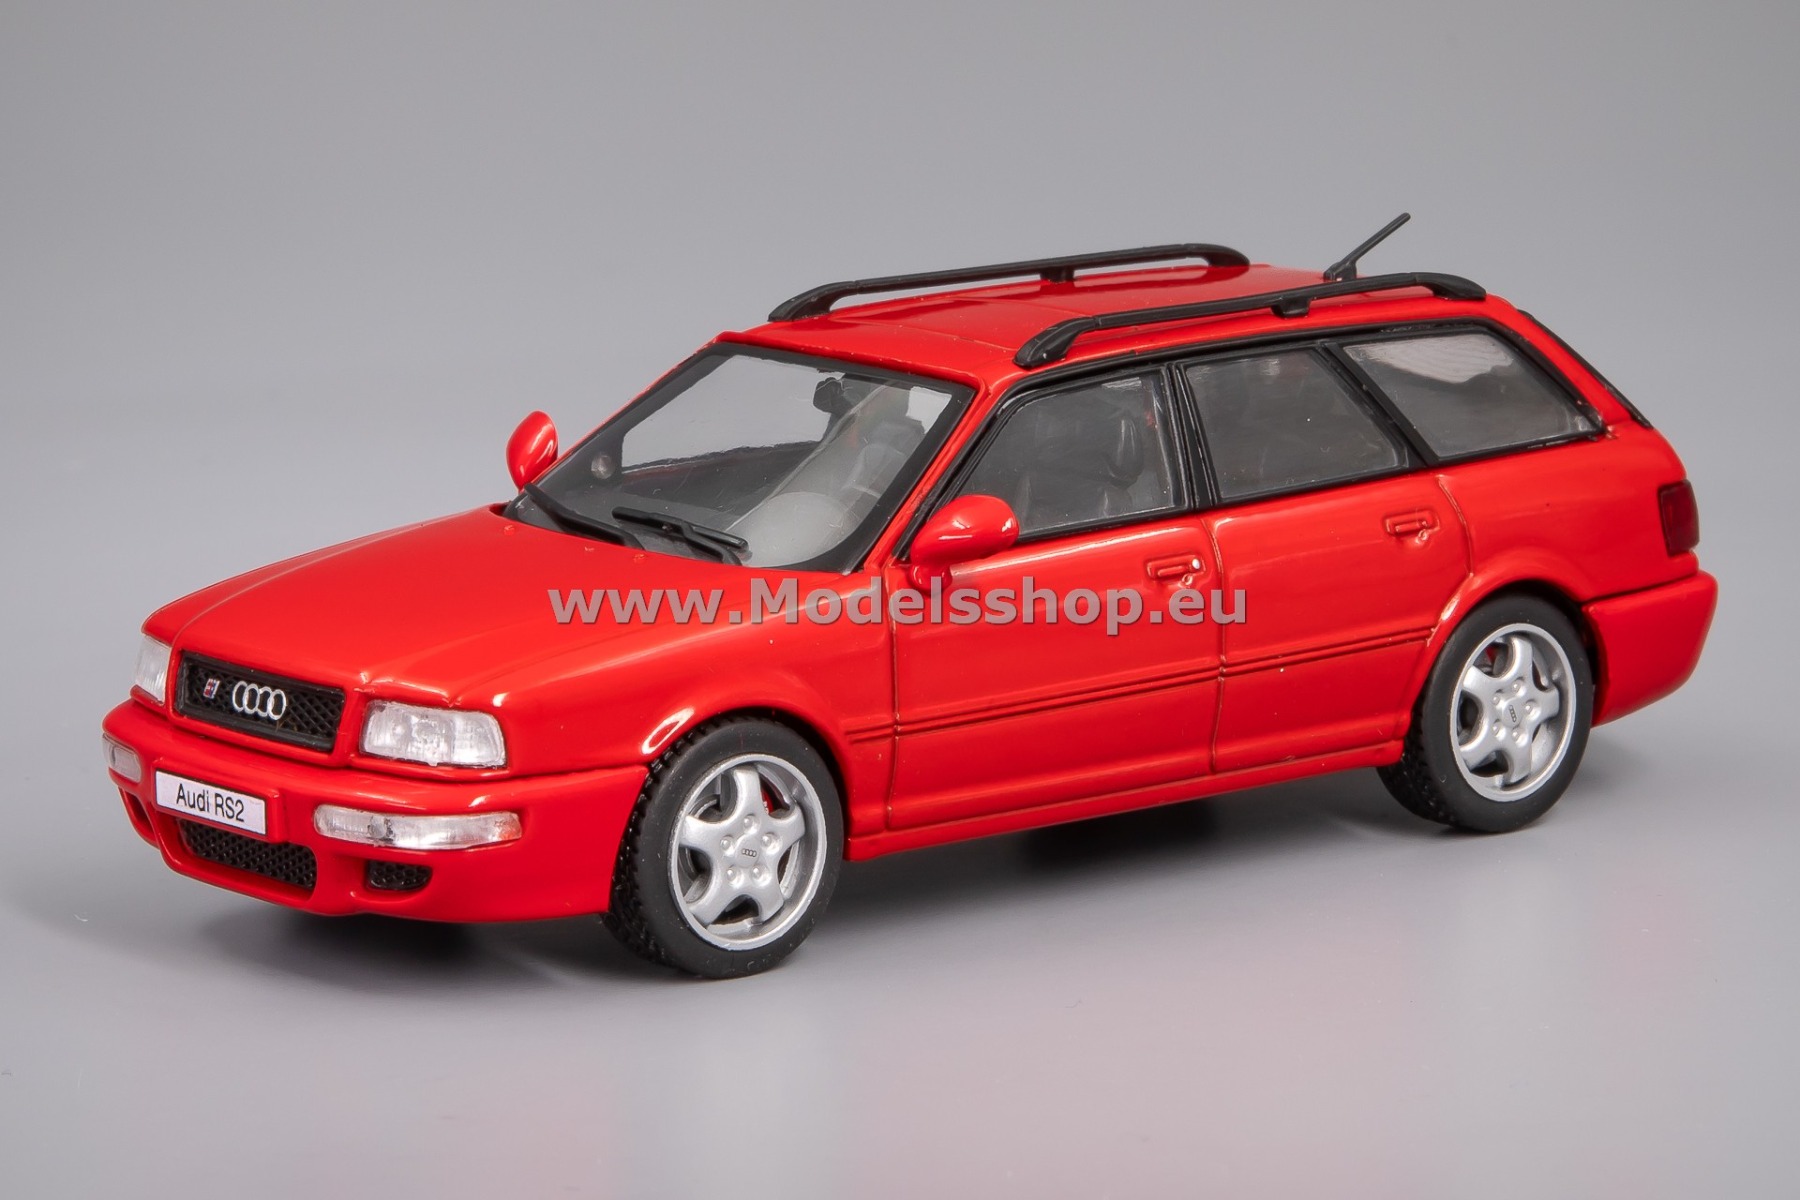 Solido S4310102 Audi Avant RS2, 1995 /red/